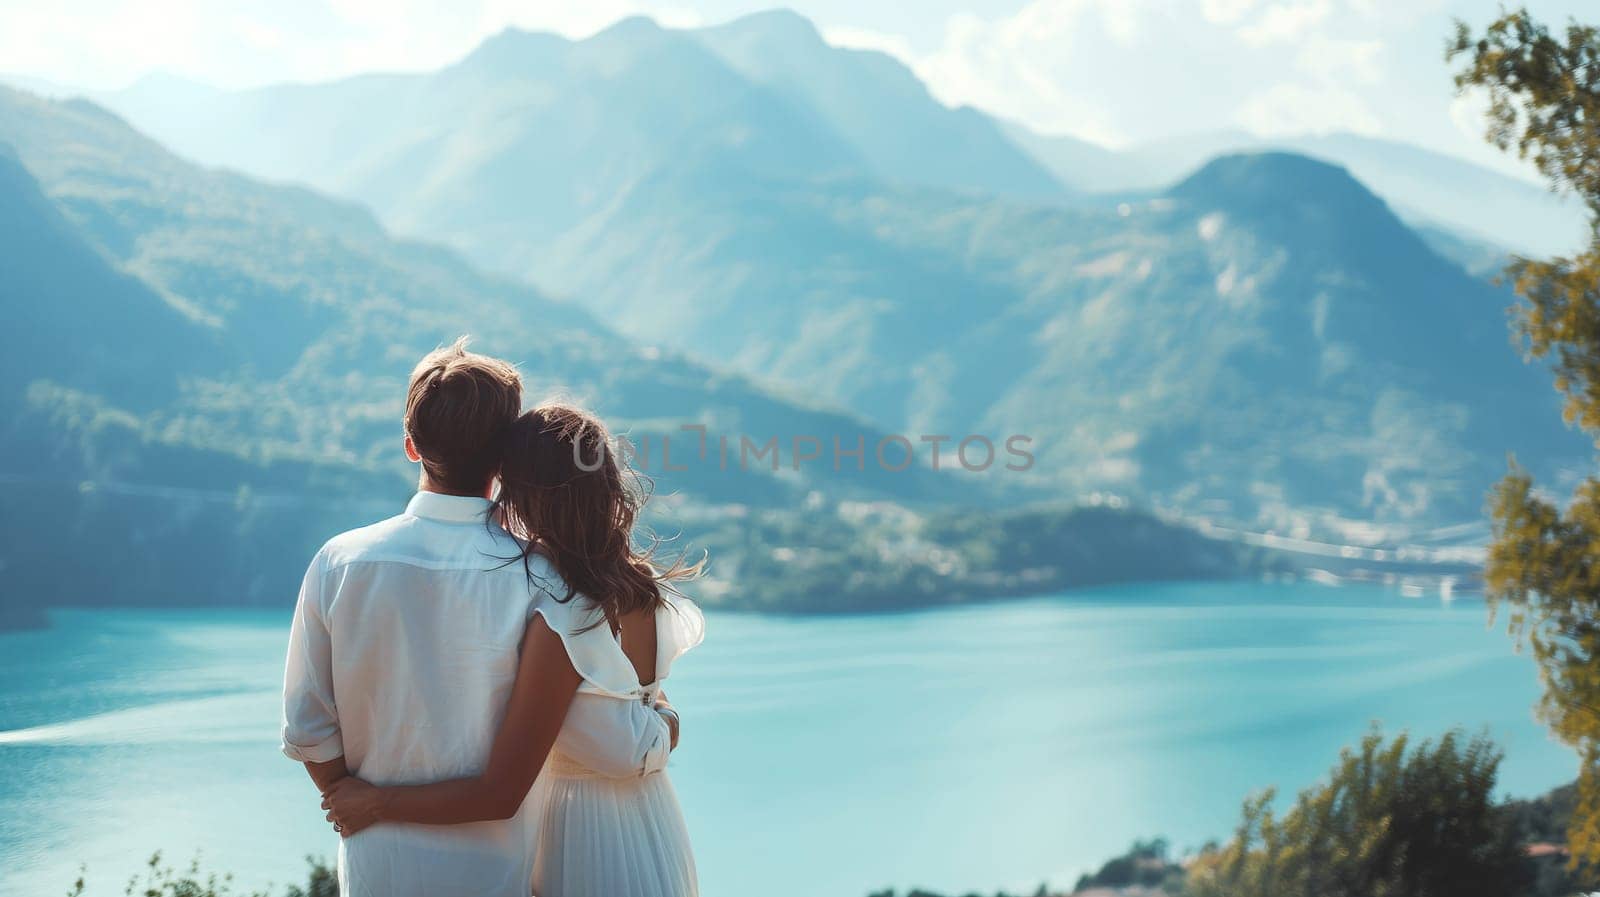 Couple Embracing by a Scenic Lake With Mountain Views by chrisroll